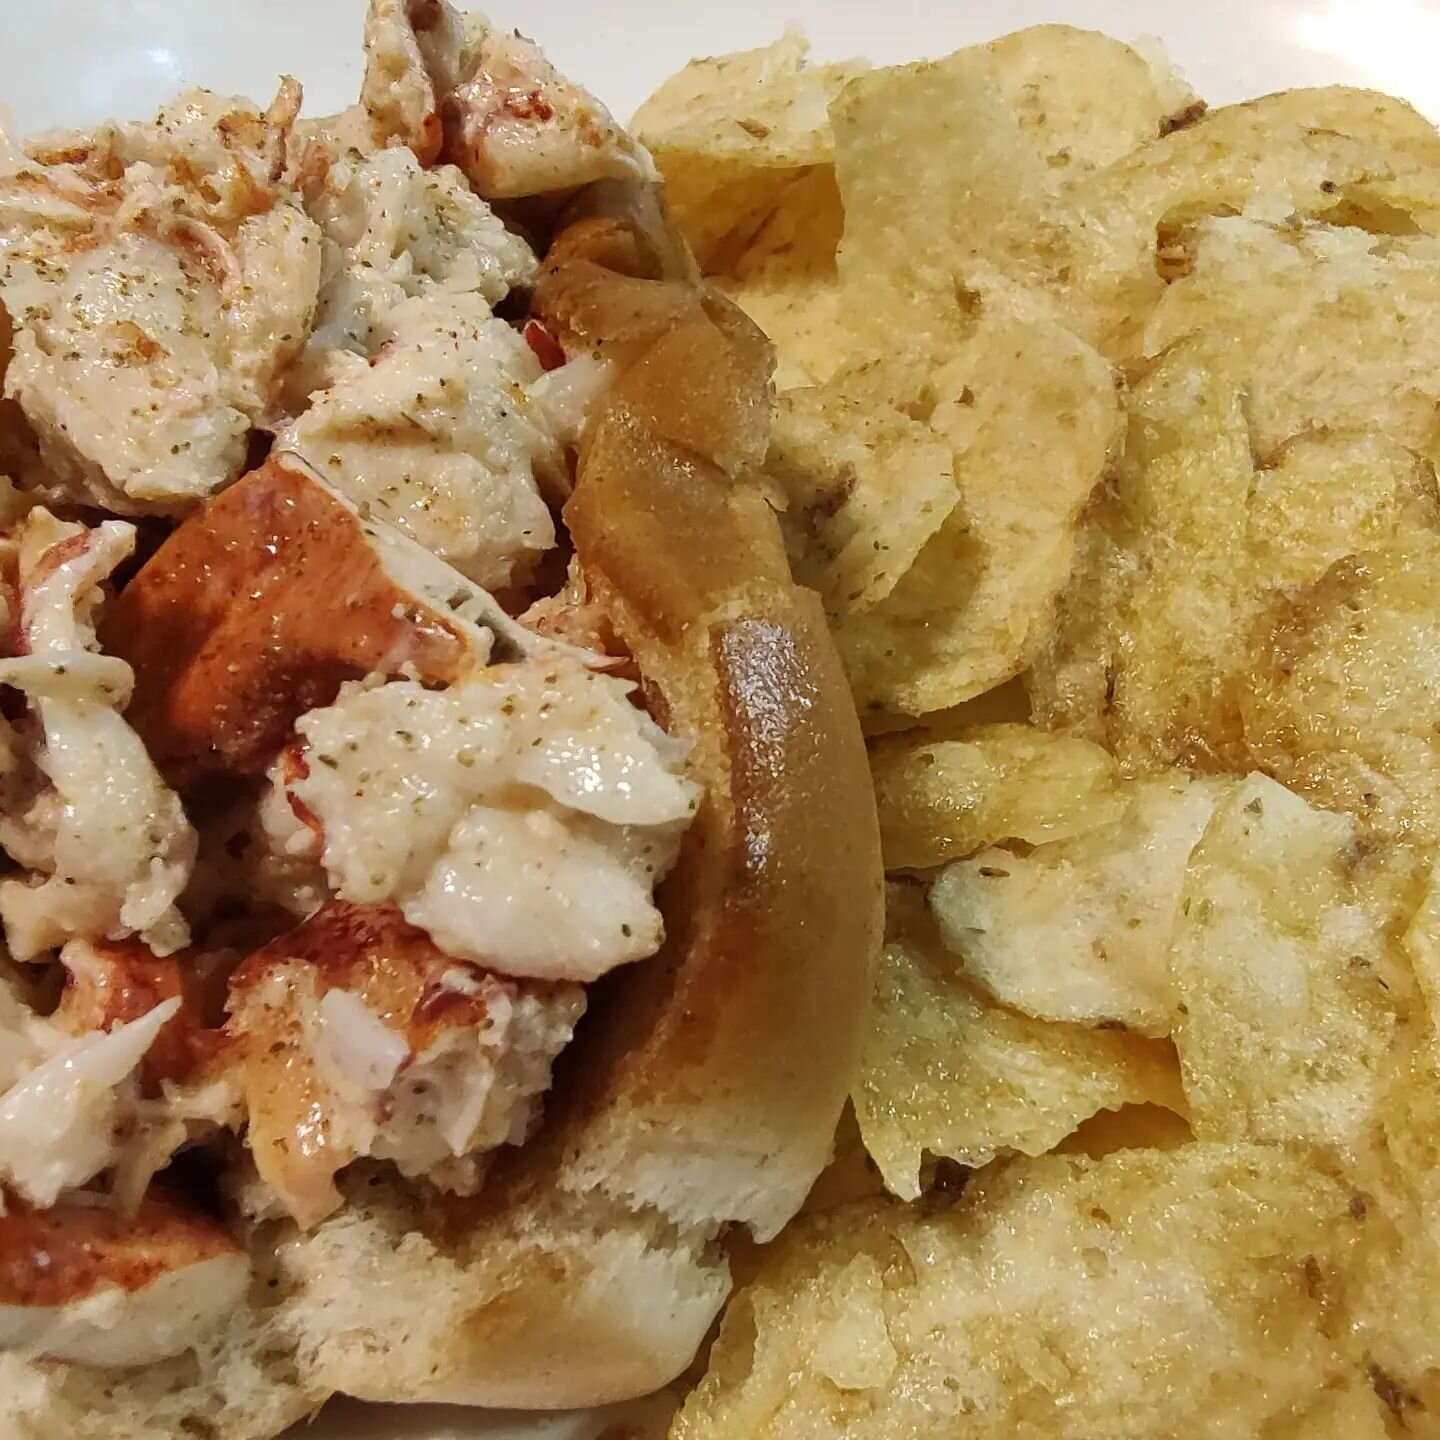 The Quintessential MAINE LOBSTER ROLL... This should ONLY be done on a toasted Country Kitchen roll. Lobster meat should be ever so lightly dressed with HELMAN's Mayo and that is it. Upon placing in the roll it should have a very light dusting of Cel